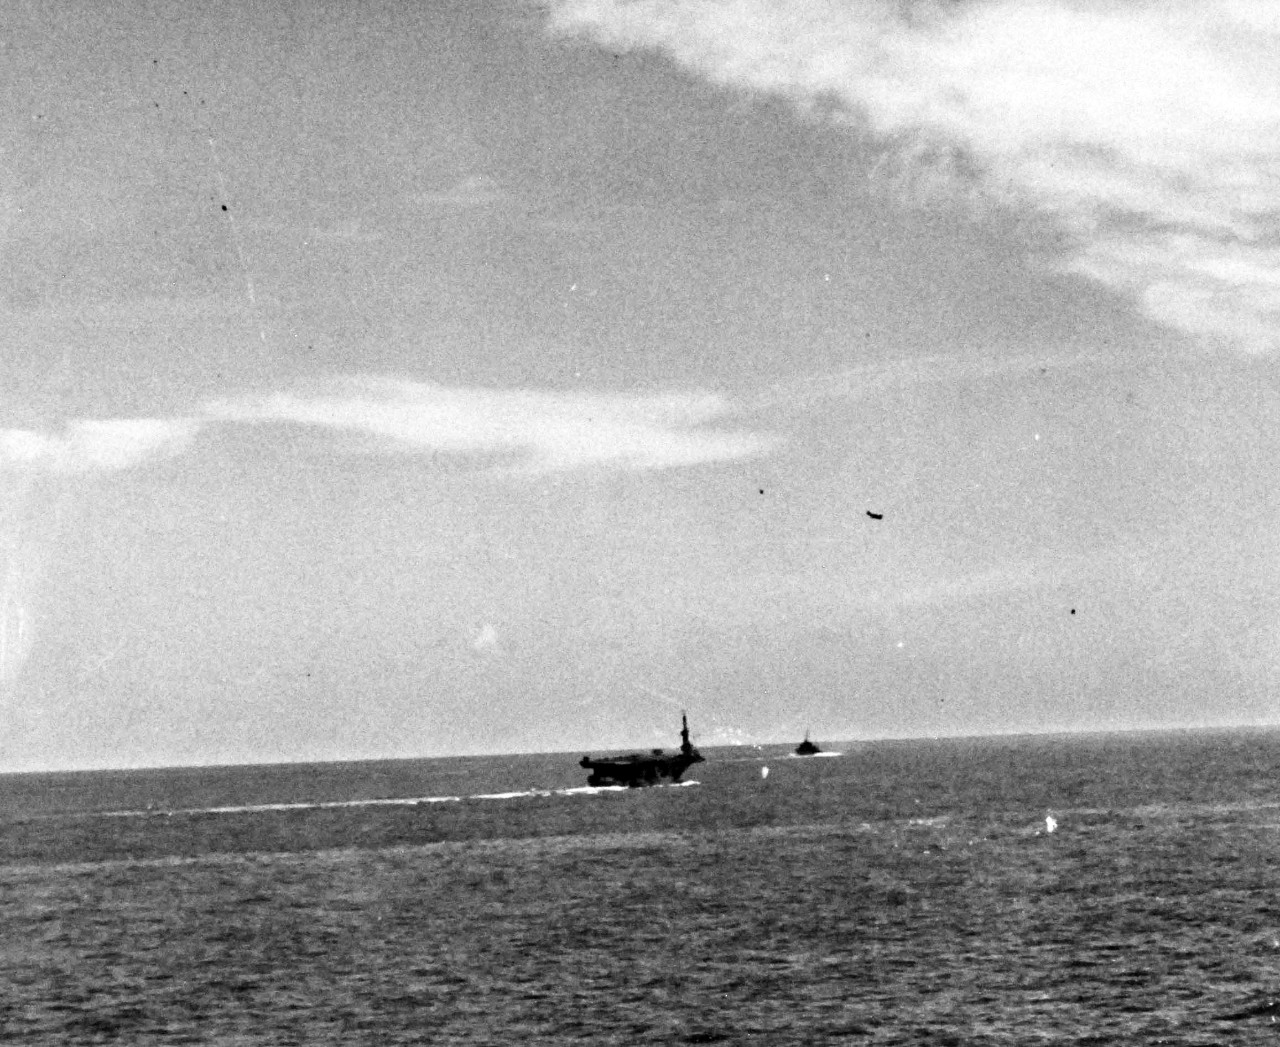 80-G-270668:    Battle off Samar, Japanese Kamikaze, October 25, 1944.    A near miss by a Japanese “Zero” on USS Petrof Bay (CVE-80) off Leyte Gulf, as seen from USS Suwannee (CVE-27).  Bomb is hitting the water.   Petrof Bay served with Task Group 77.4.1 “Taffy 1” during the battle.    Official U.S. Navy Photograph, now in the collections of the National Archives.   (2014/4/24). 